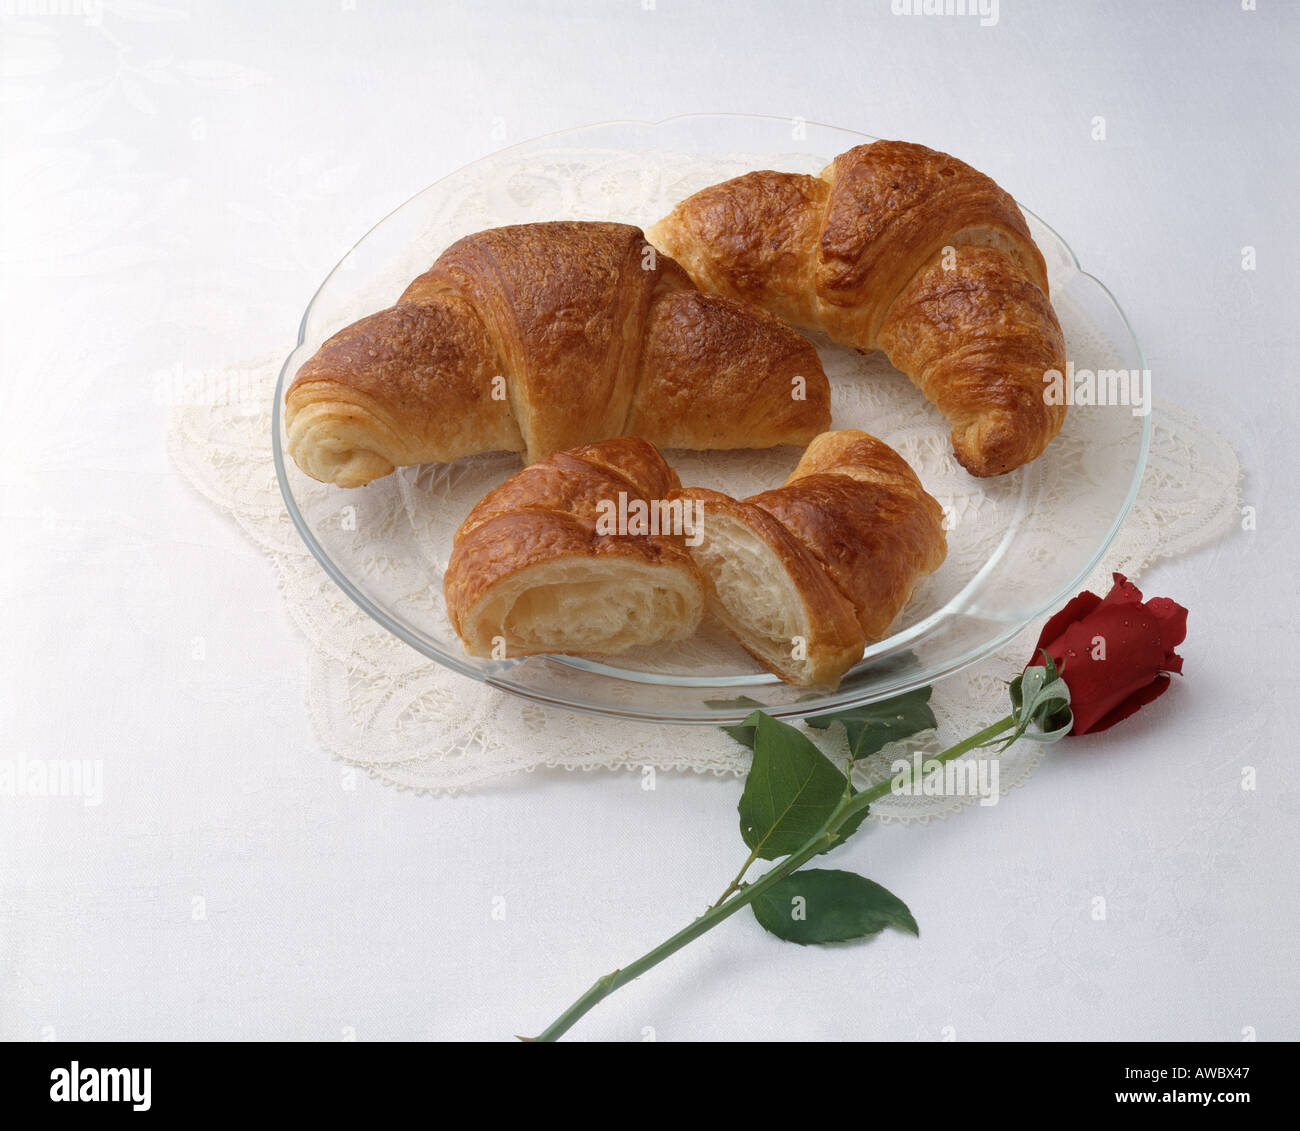 fast food hearty breakfast croissant glass plate long stem rose cuisine Stock Photo